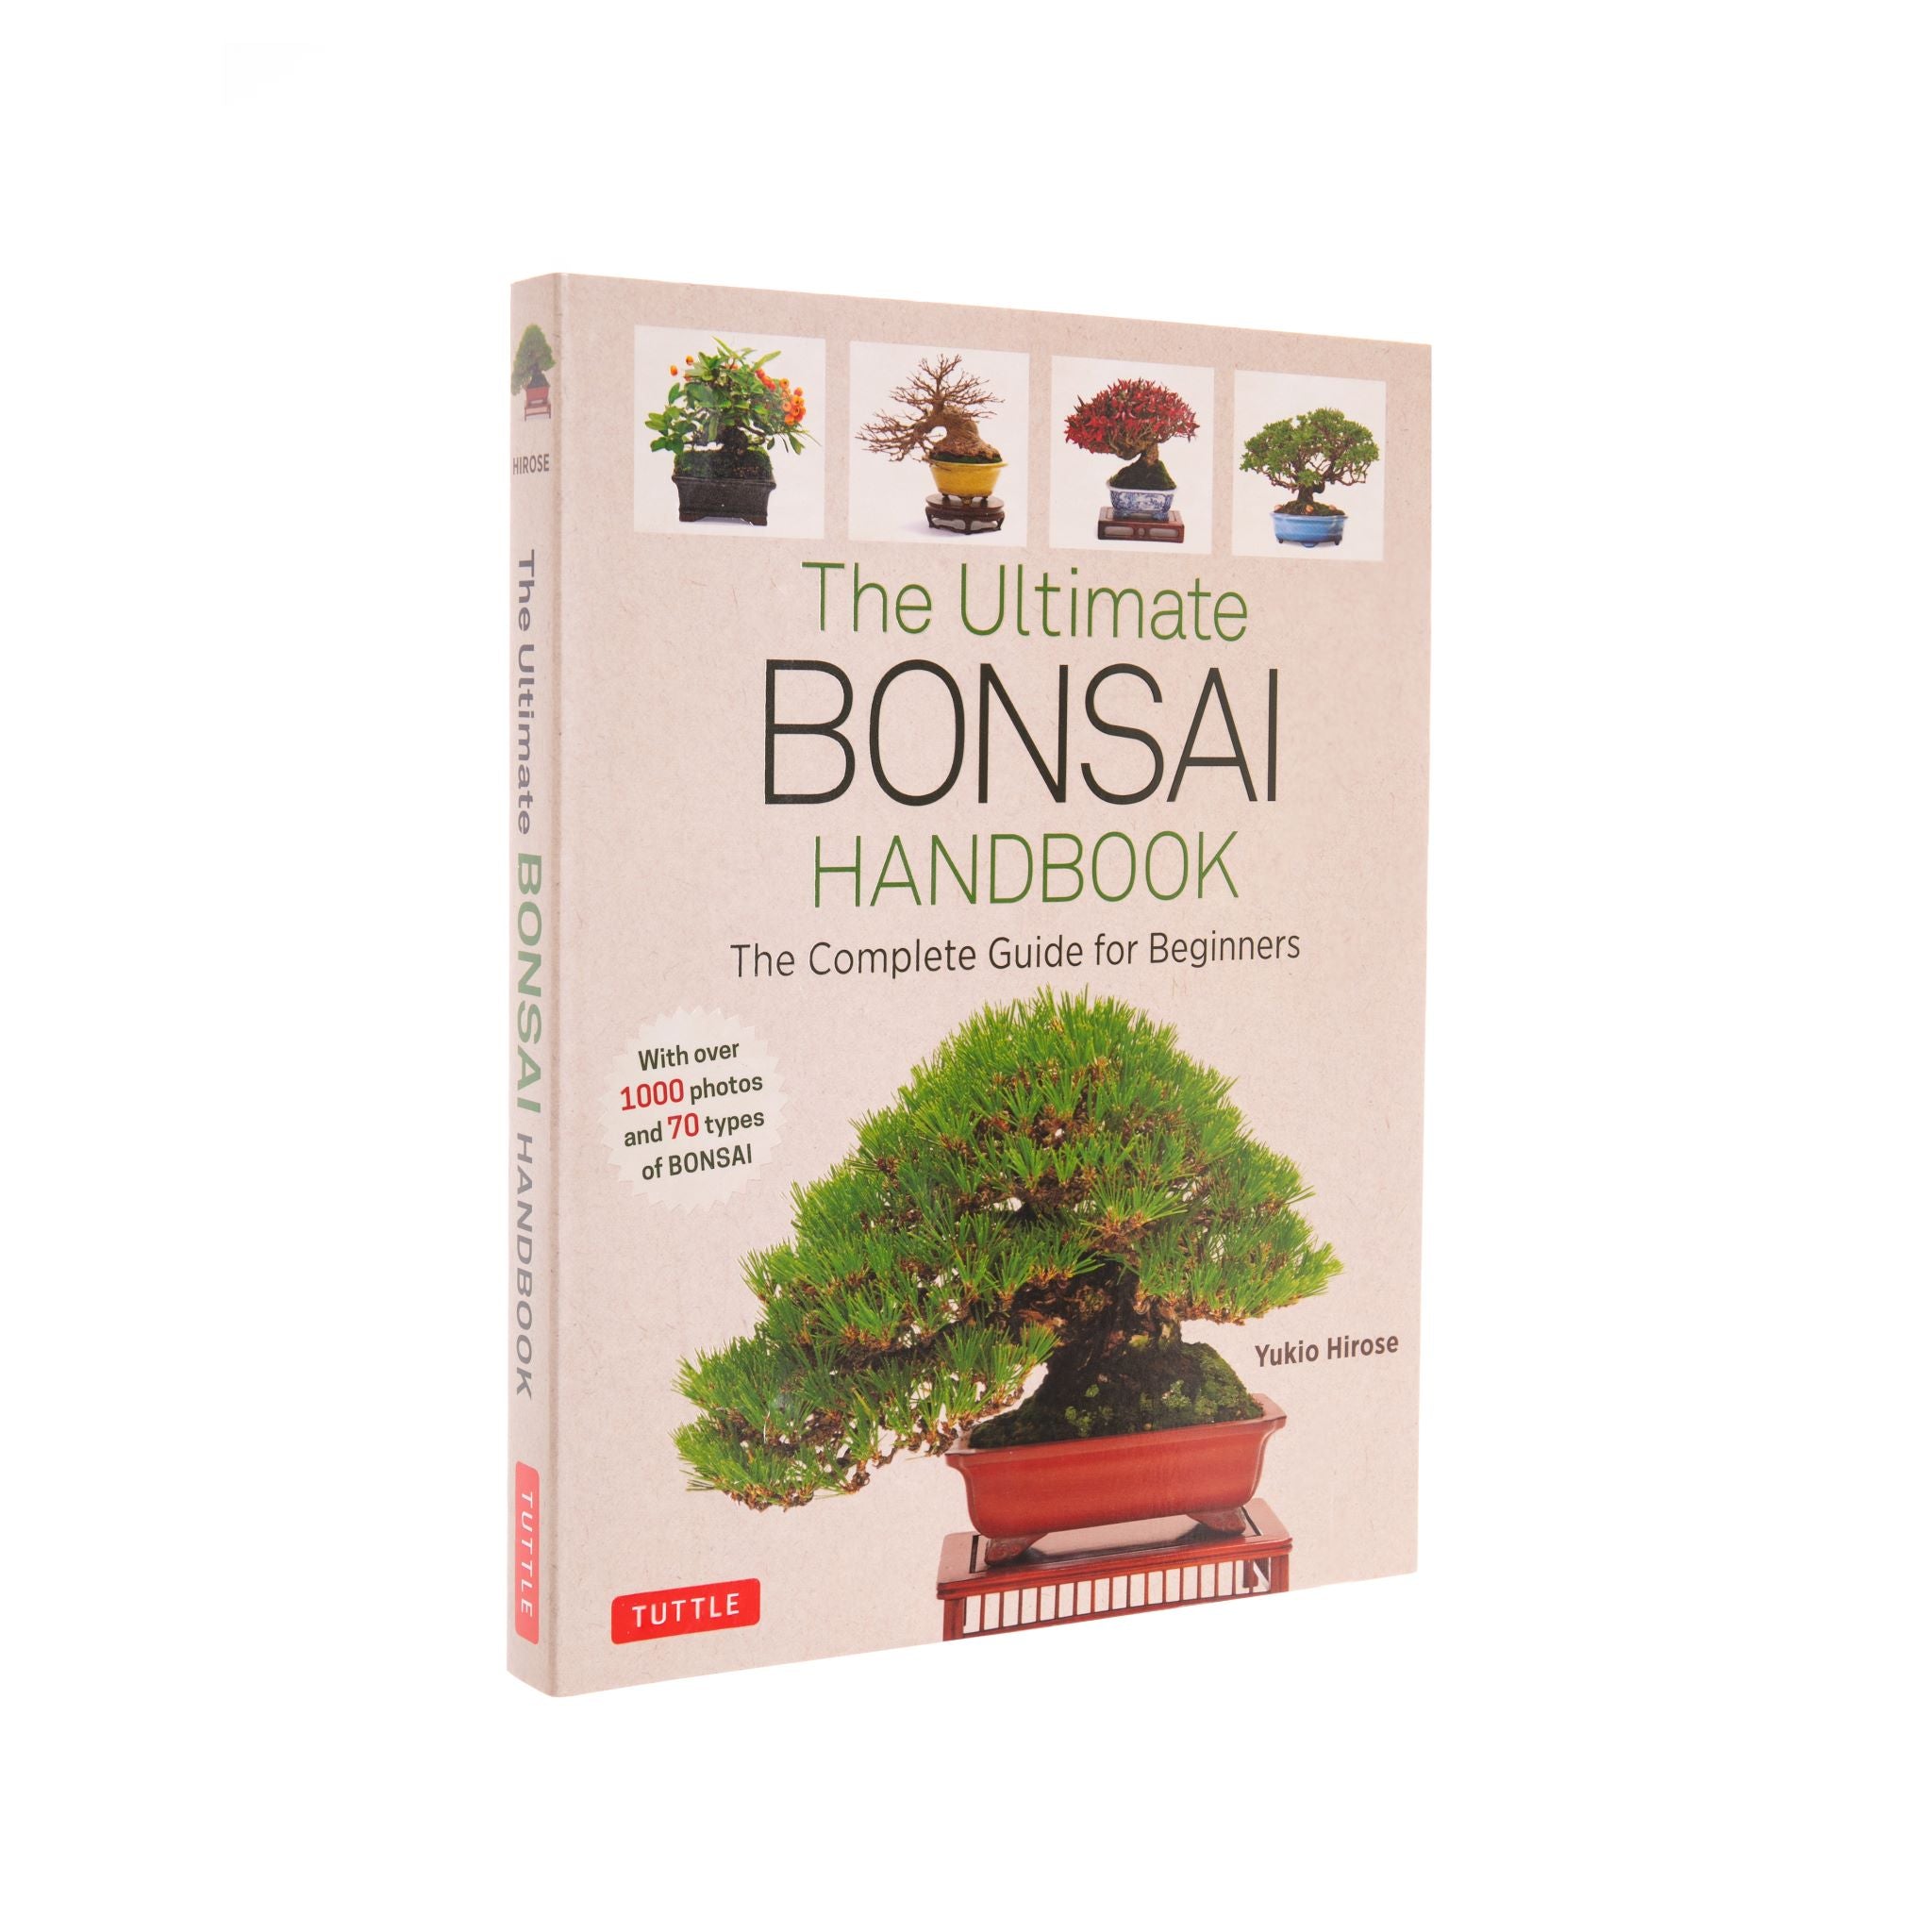 Buy a Bonsai Tree: Your Ultimate Shopping Guide